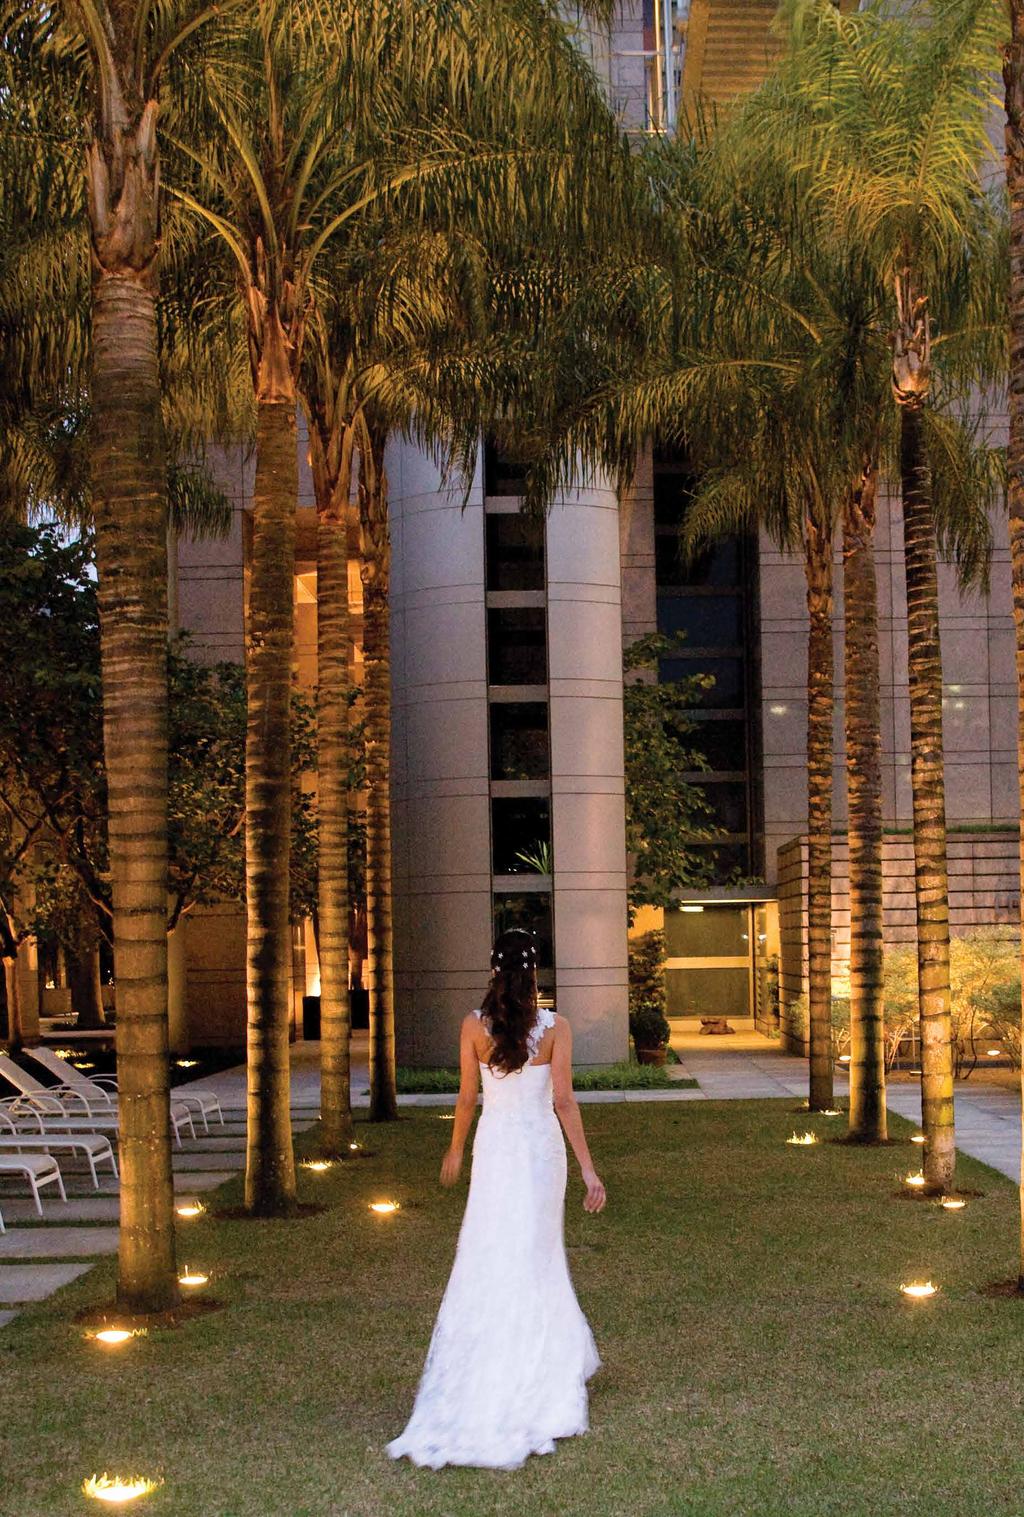 BANQUETS & WEDDINGS At Grand Hyatt São Paulo, a celebration is considered a piece of art.